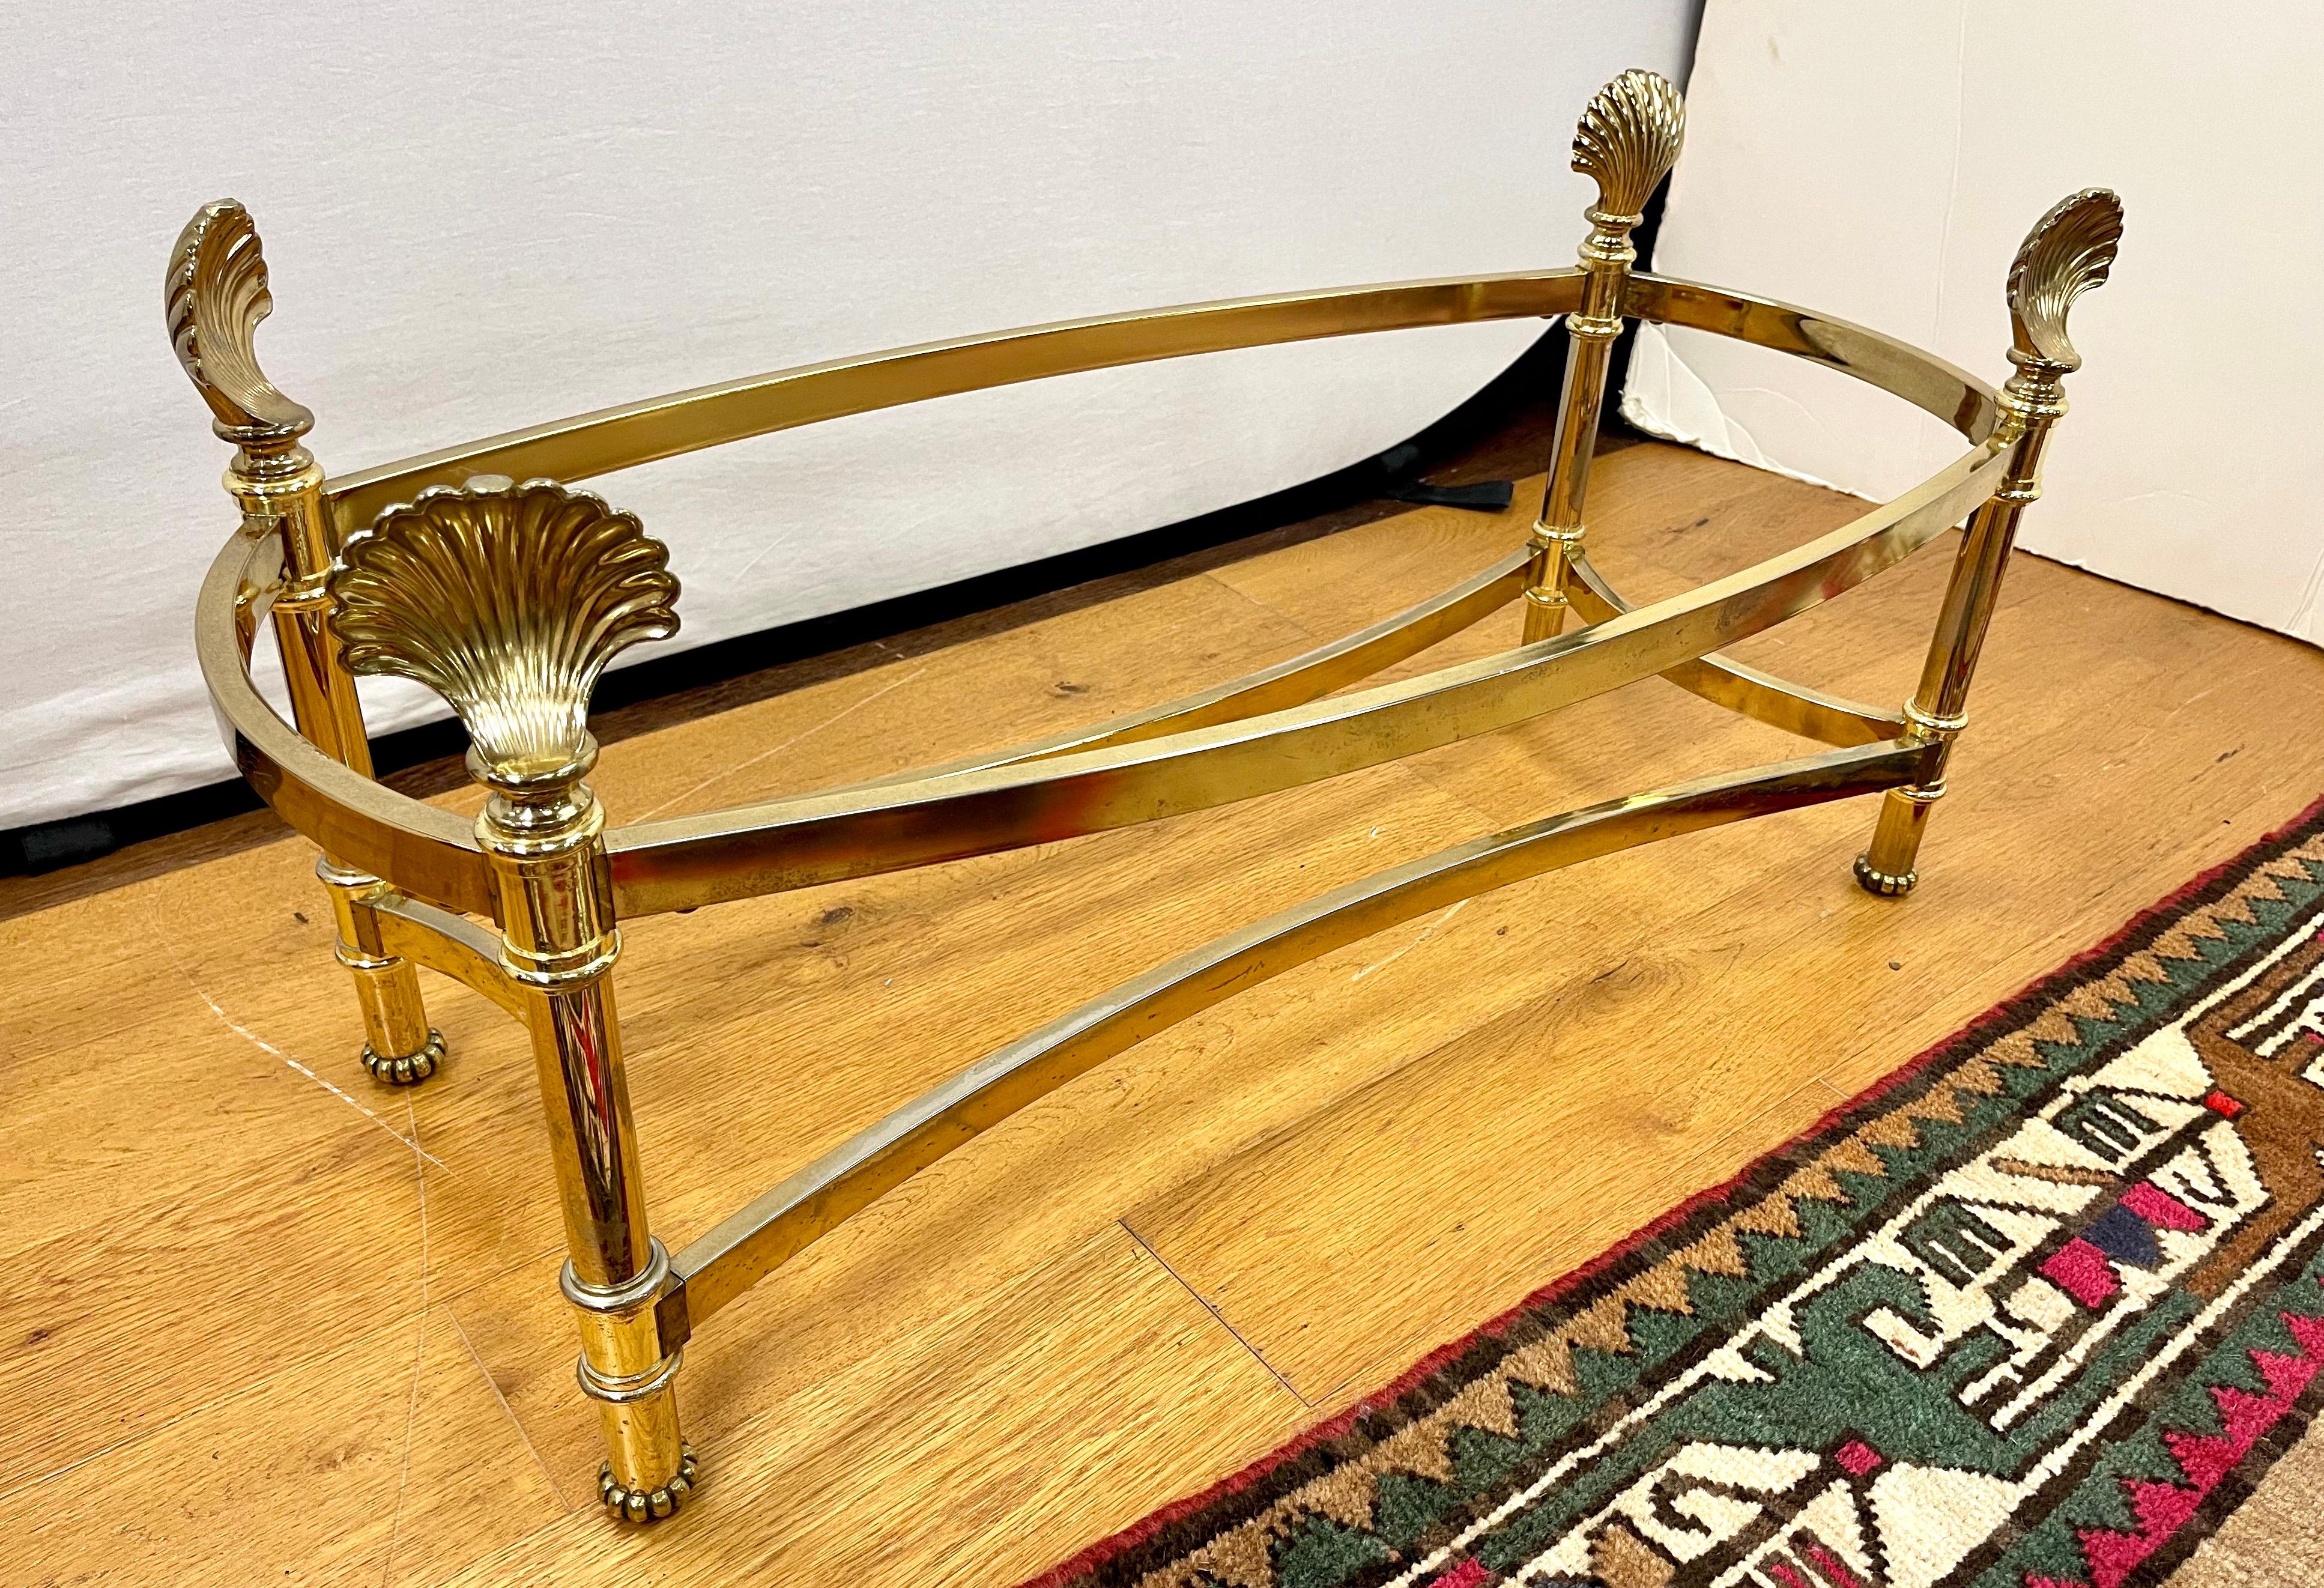 Stunning Mid-Century Modern cocktail table with elegant solid brass bottom with sea shell detail that supports an oval glass top. Belongs in Architectural Digest!